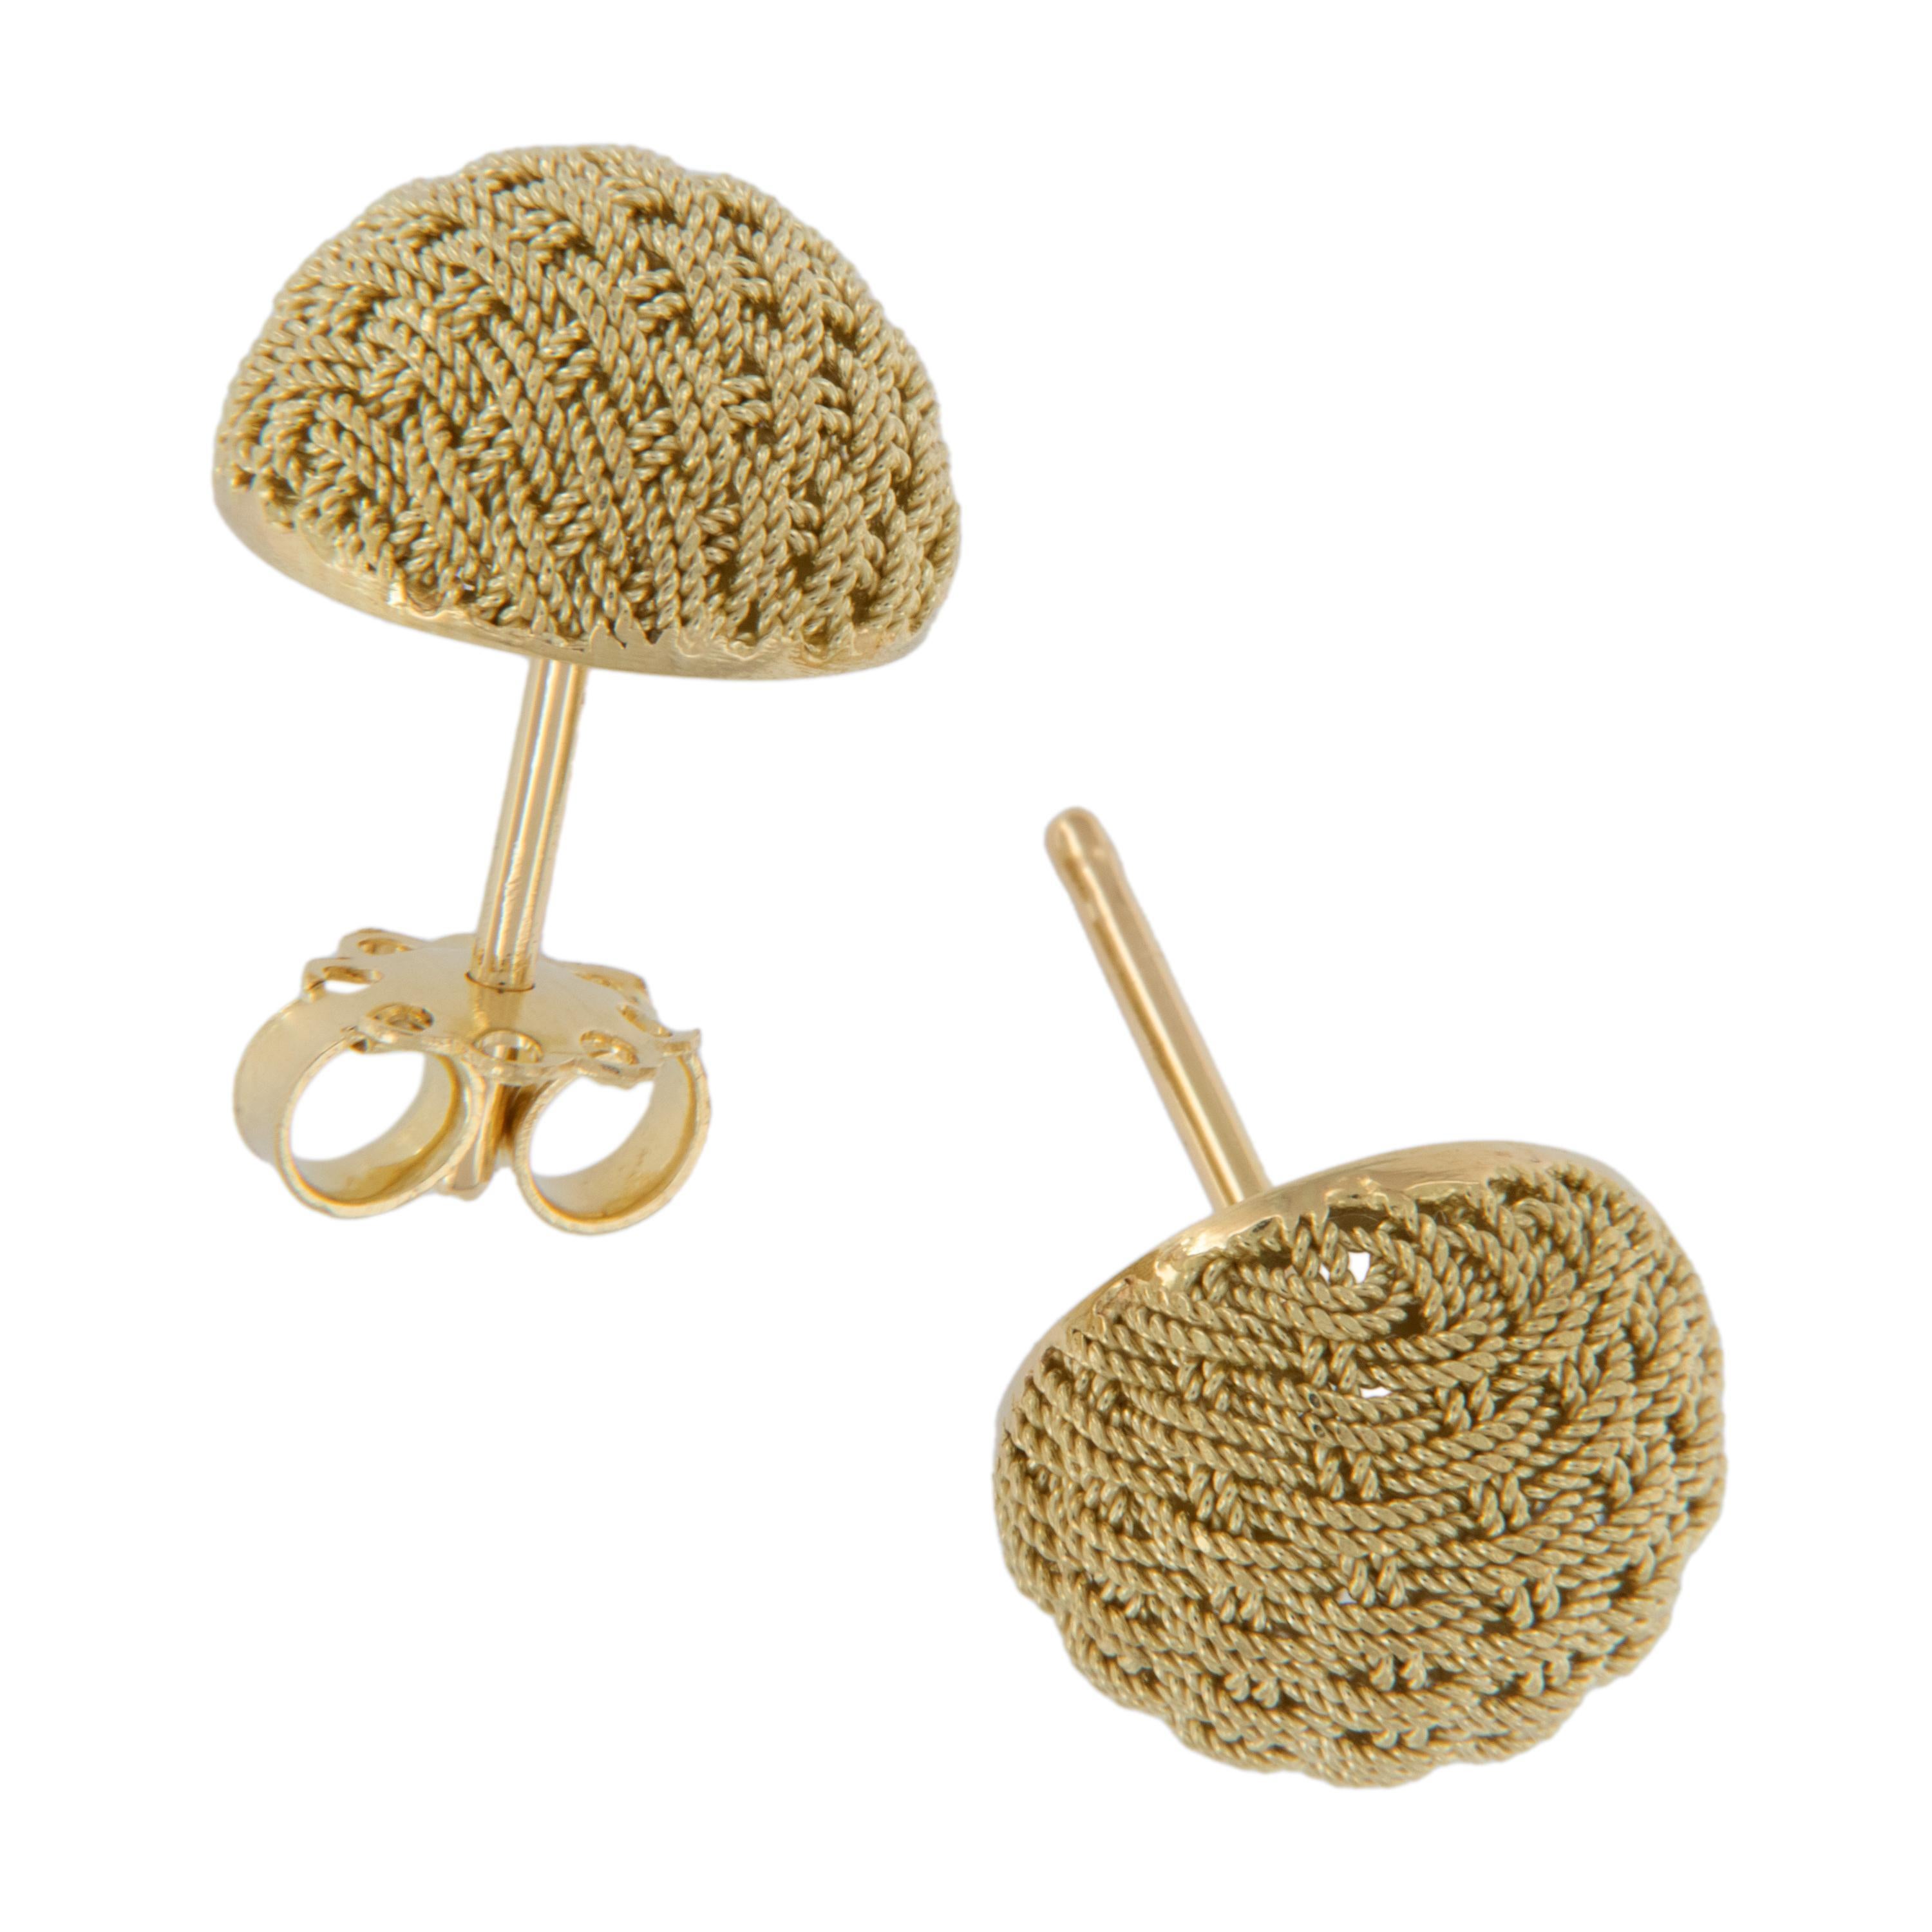 Italian craftsmen are known for their intricate finishes which are apparent on these adorable twisted wire basket weave button earrings. Made from rich 18 karat yellow gold these earrings are 12.54mm in diameter with posts and friction backs for